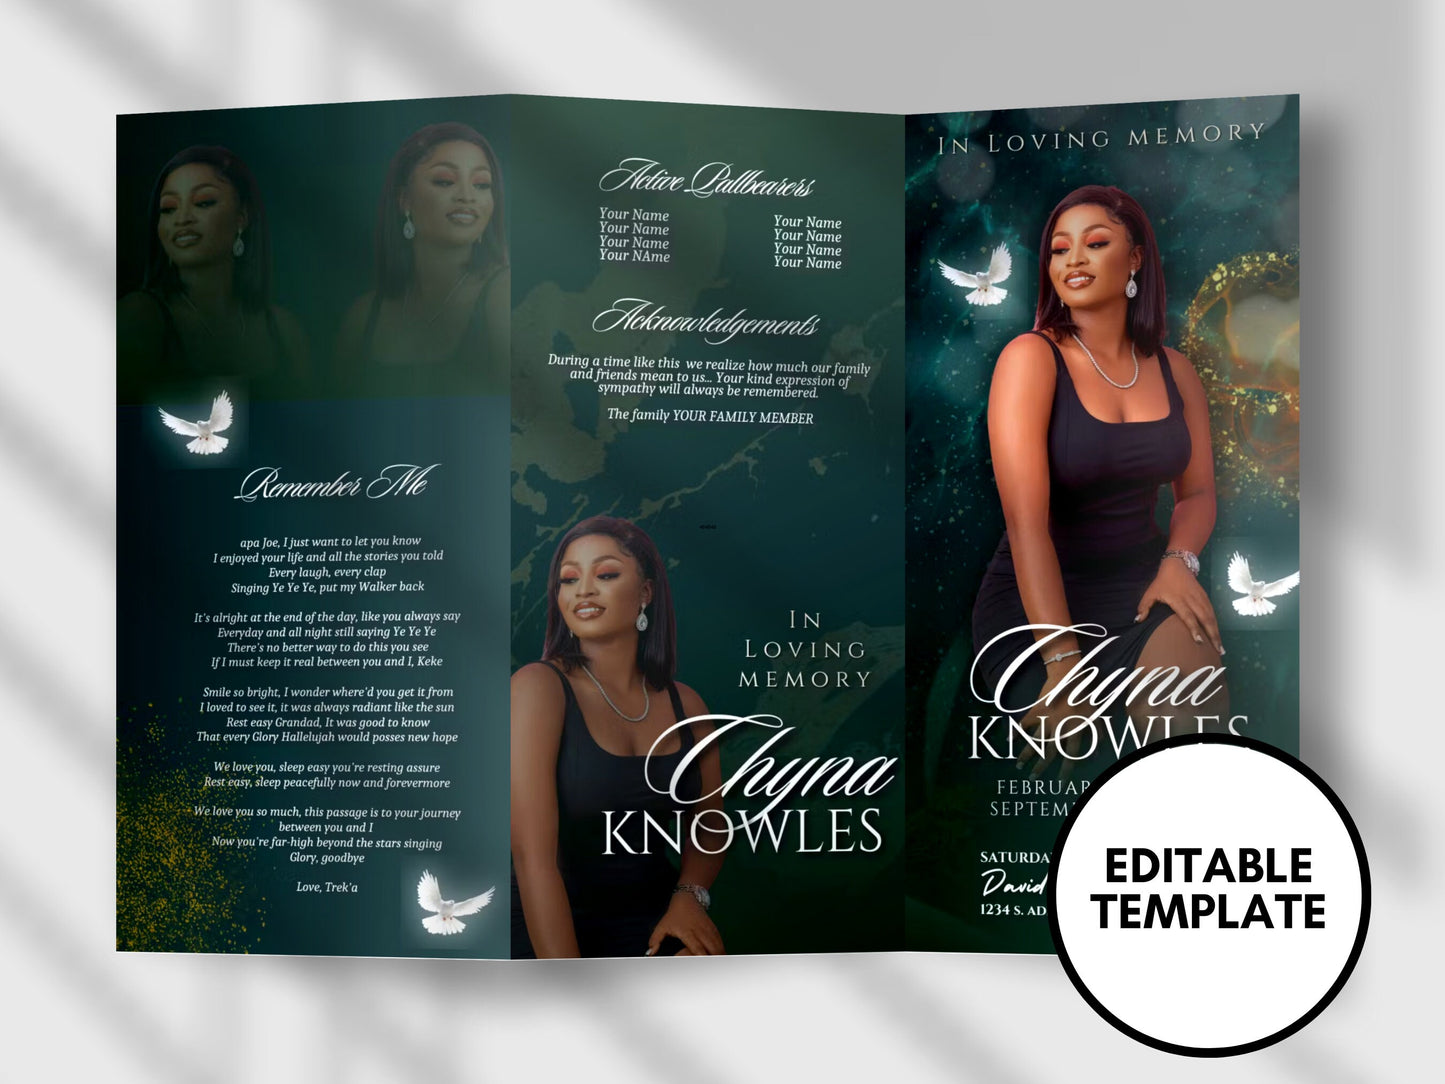 17"x11" FUNERAL PHAMPLET (2 pages) |Emerald Green | In Loving Memory |Classy Obituary | Editable Canva Template